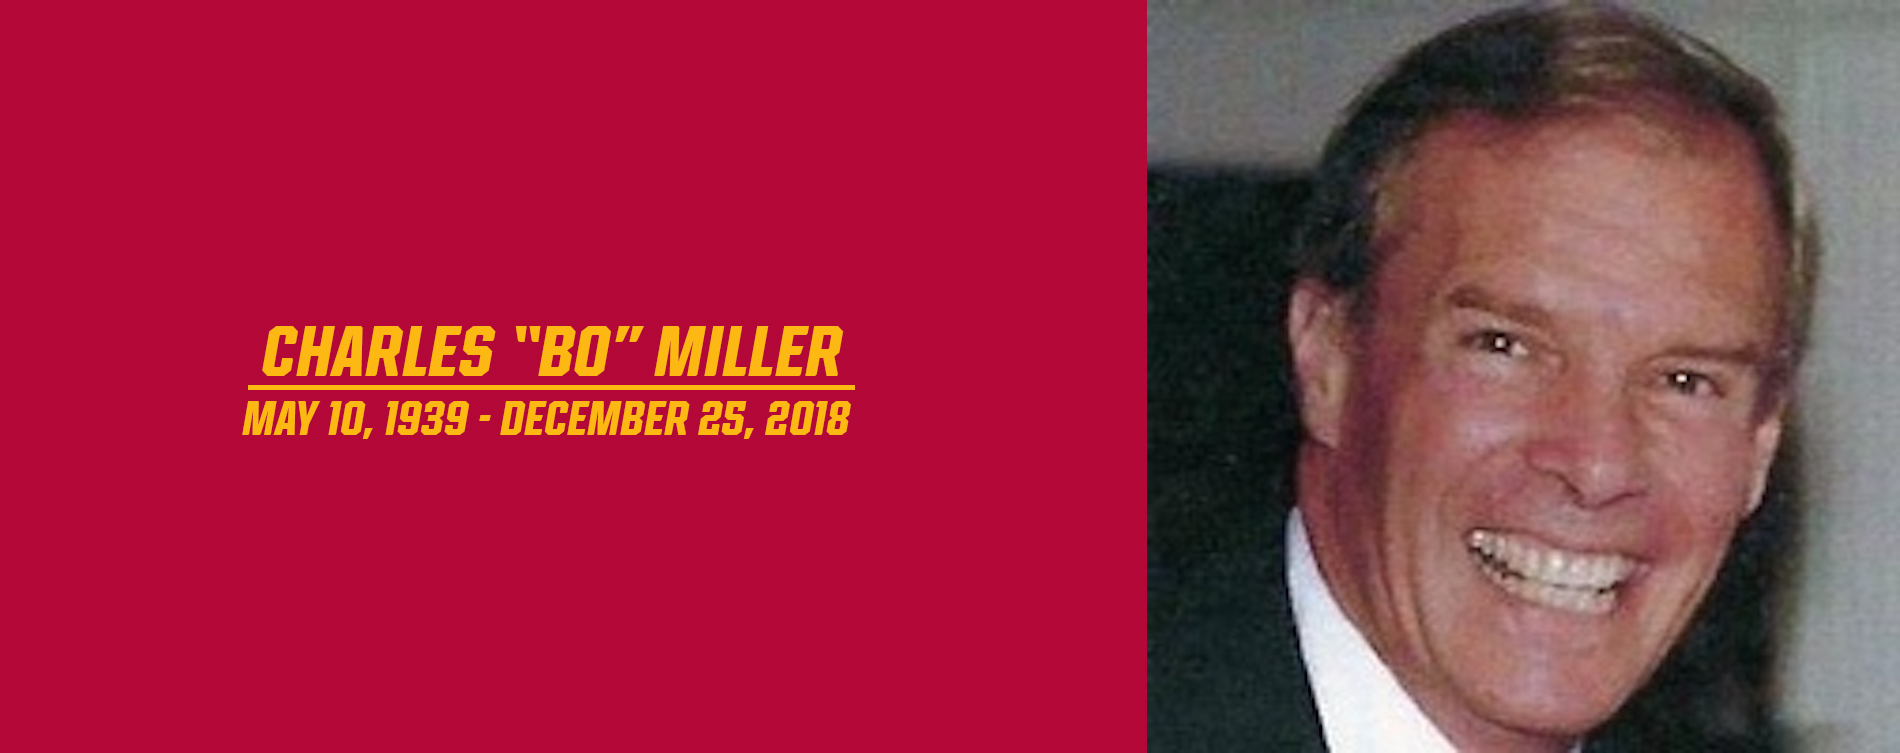 Austin College Mourns the Passing of Charles "Bo" Miller